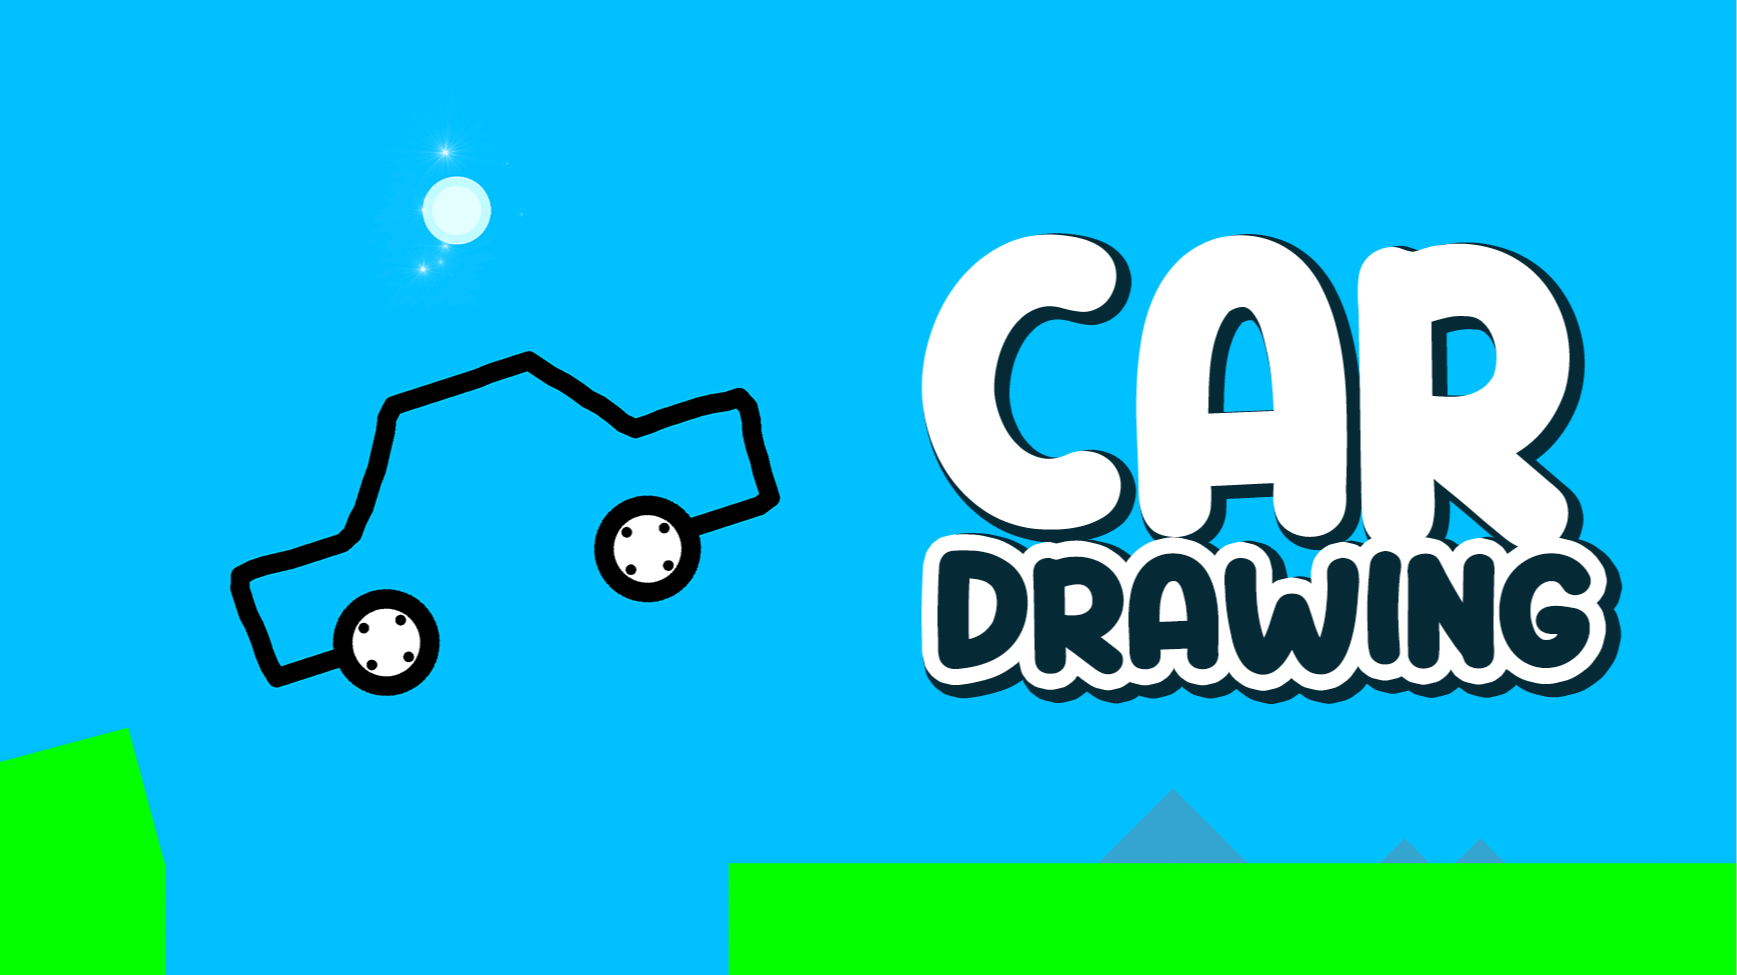 Draw Physics Line: Play Draw Physics Line for free